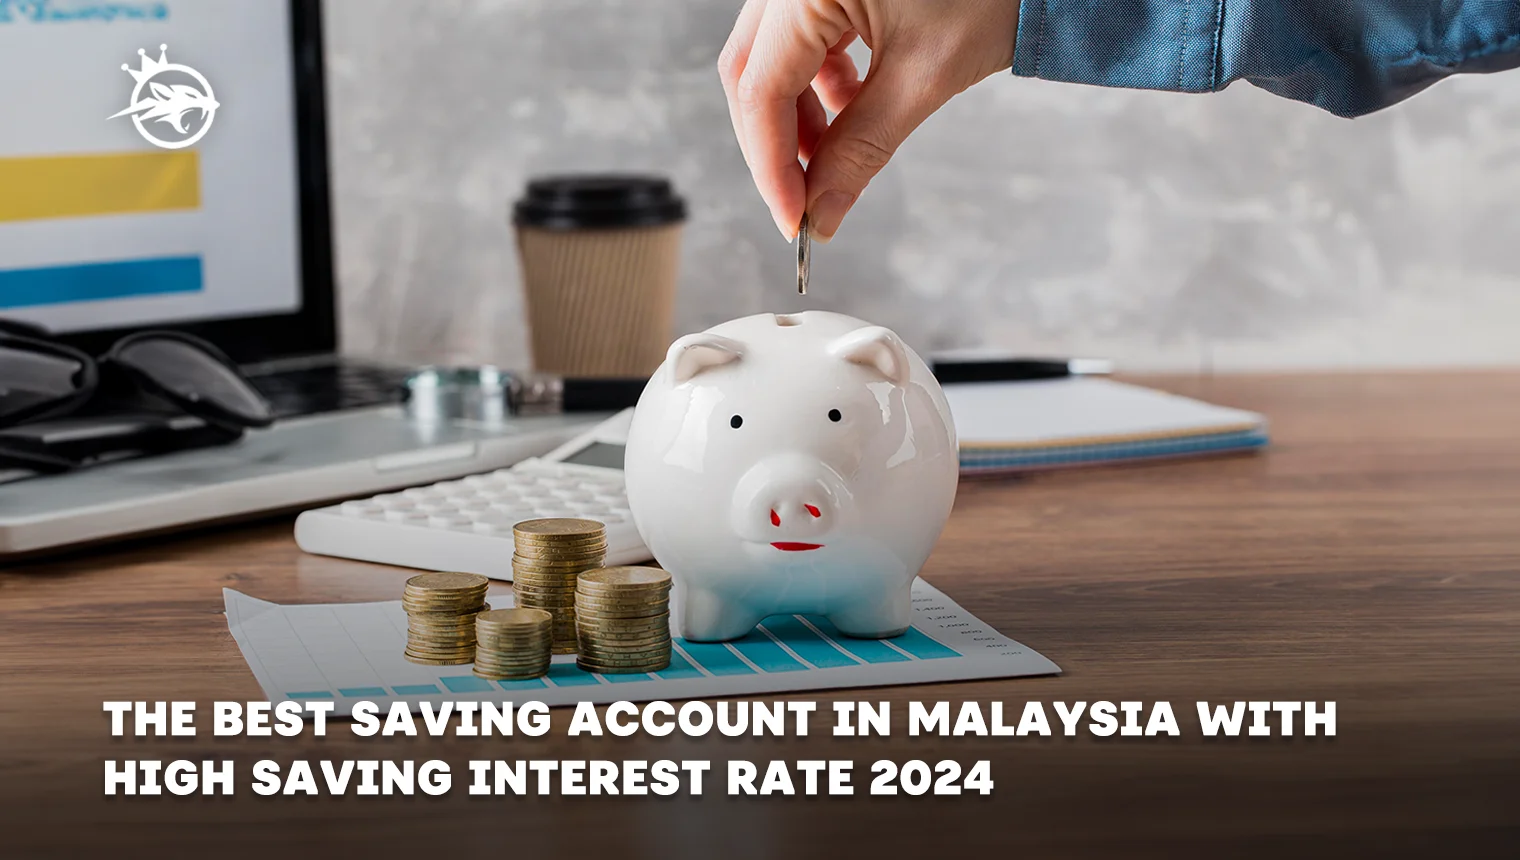 The Best Saving Account in Malaysia With High Saving Interest Rate 2024 